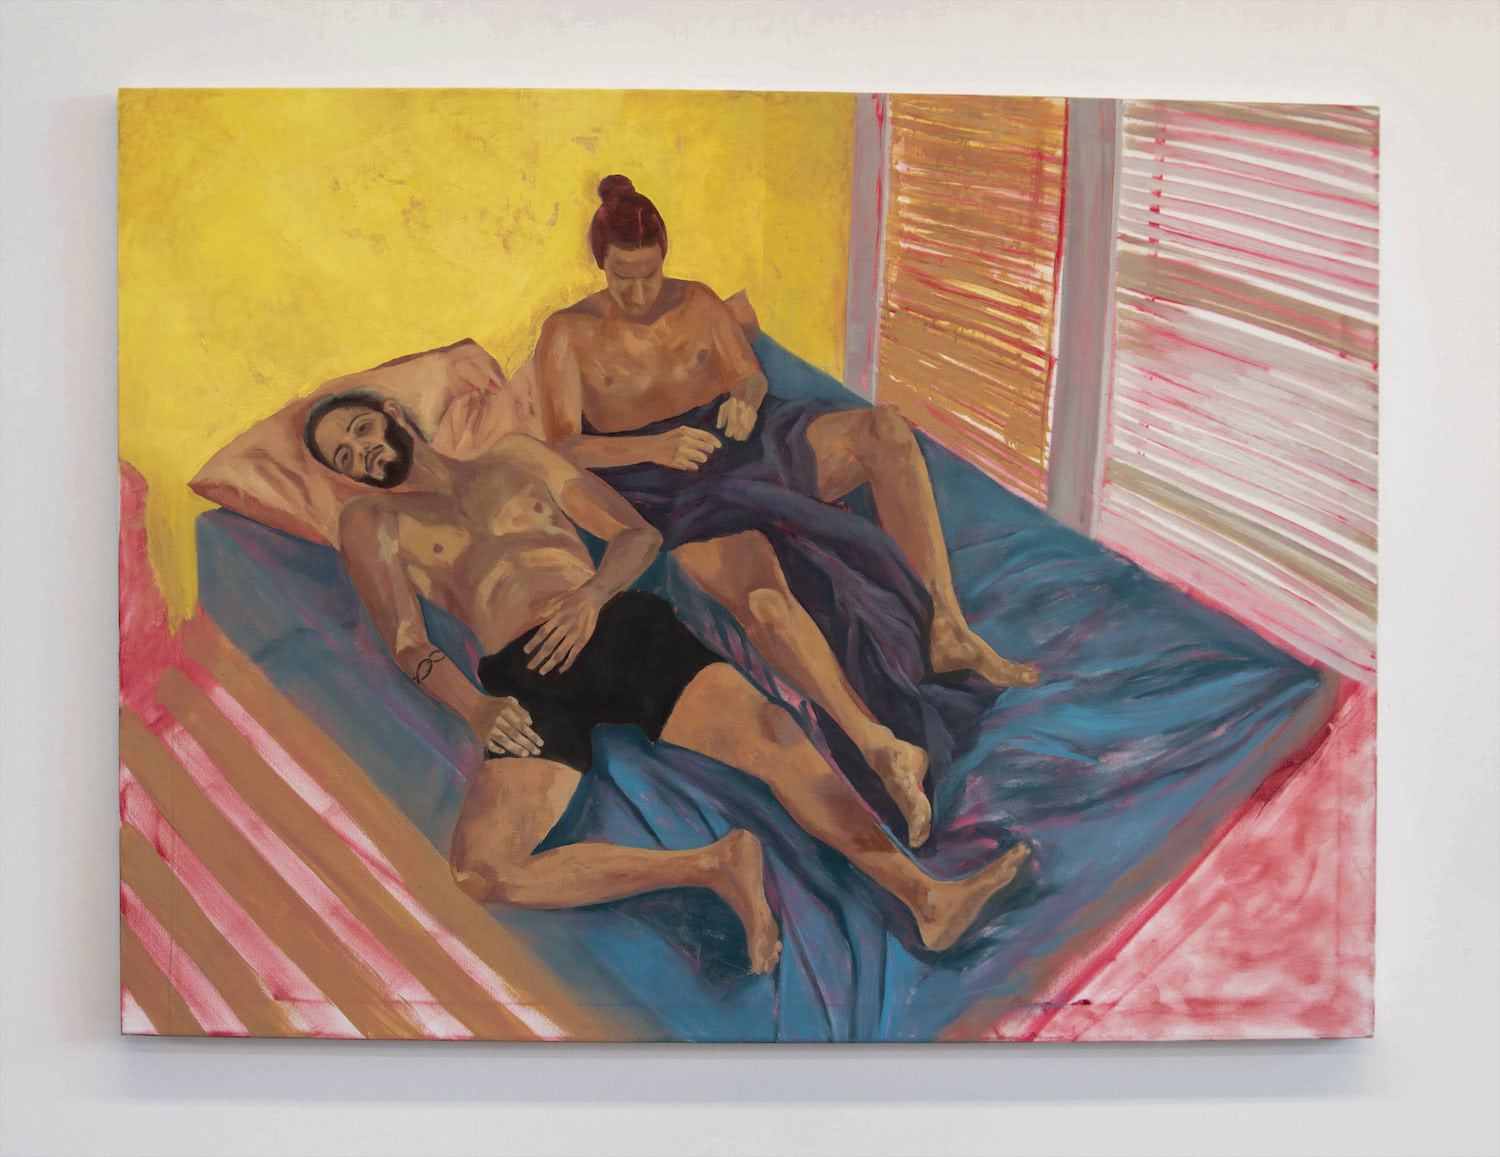 This image shows a horizontal oil painting portraying two men barely touching and laying in bed together, from a high angle. One of the men is making eye contact with the viewer, inviting them into his world of intimacy and vulnerability. Deep reds from the underpainting emanate throughout the painting.